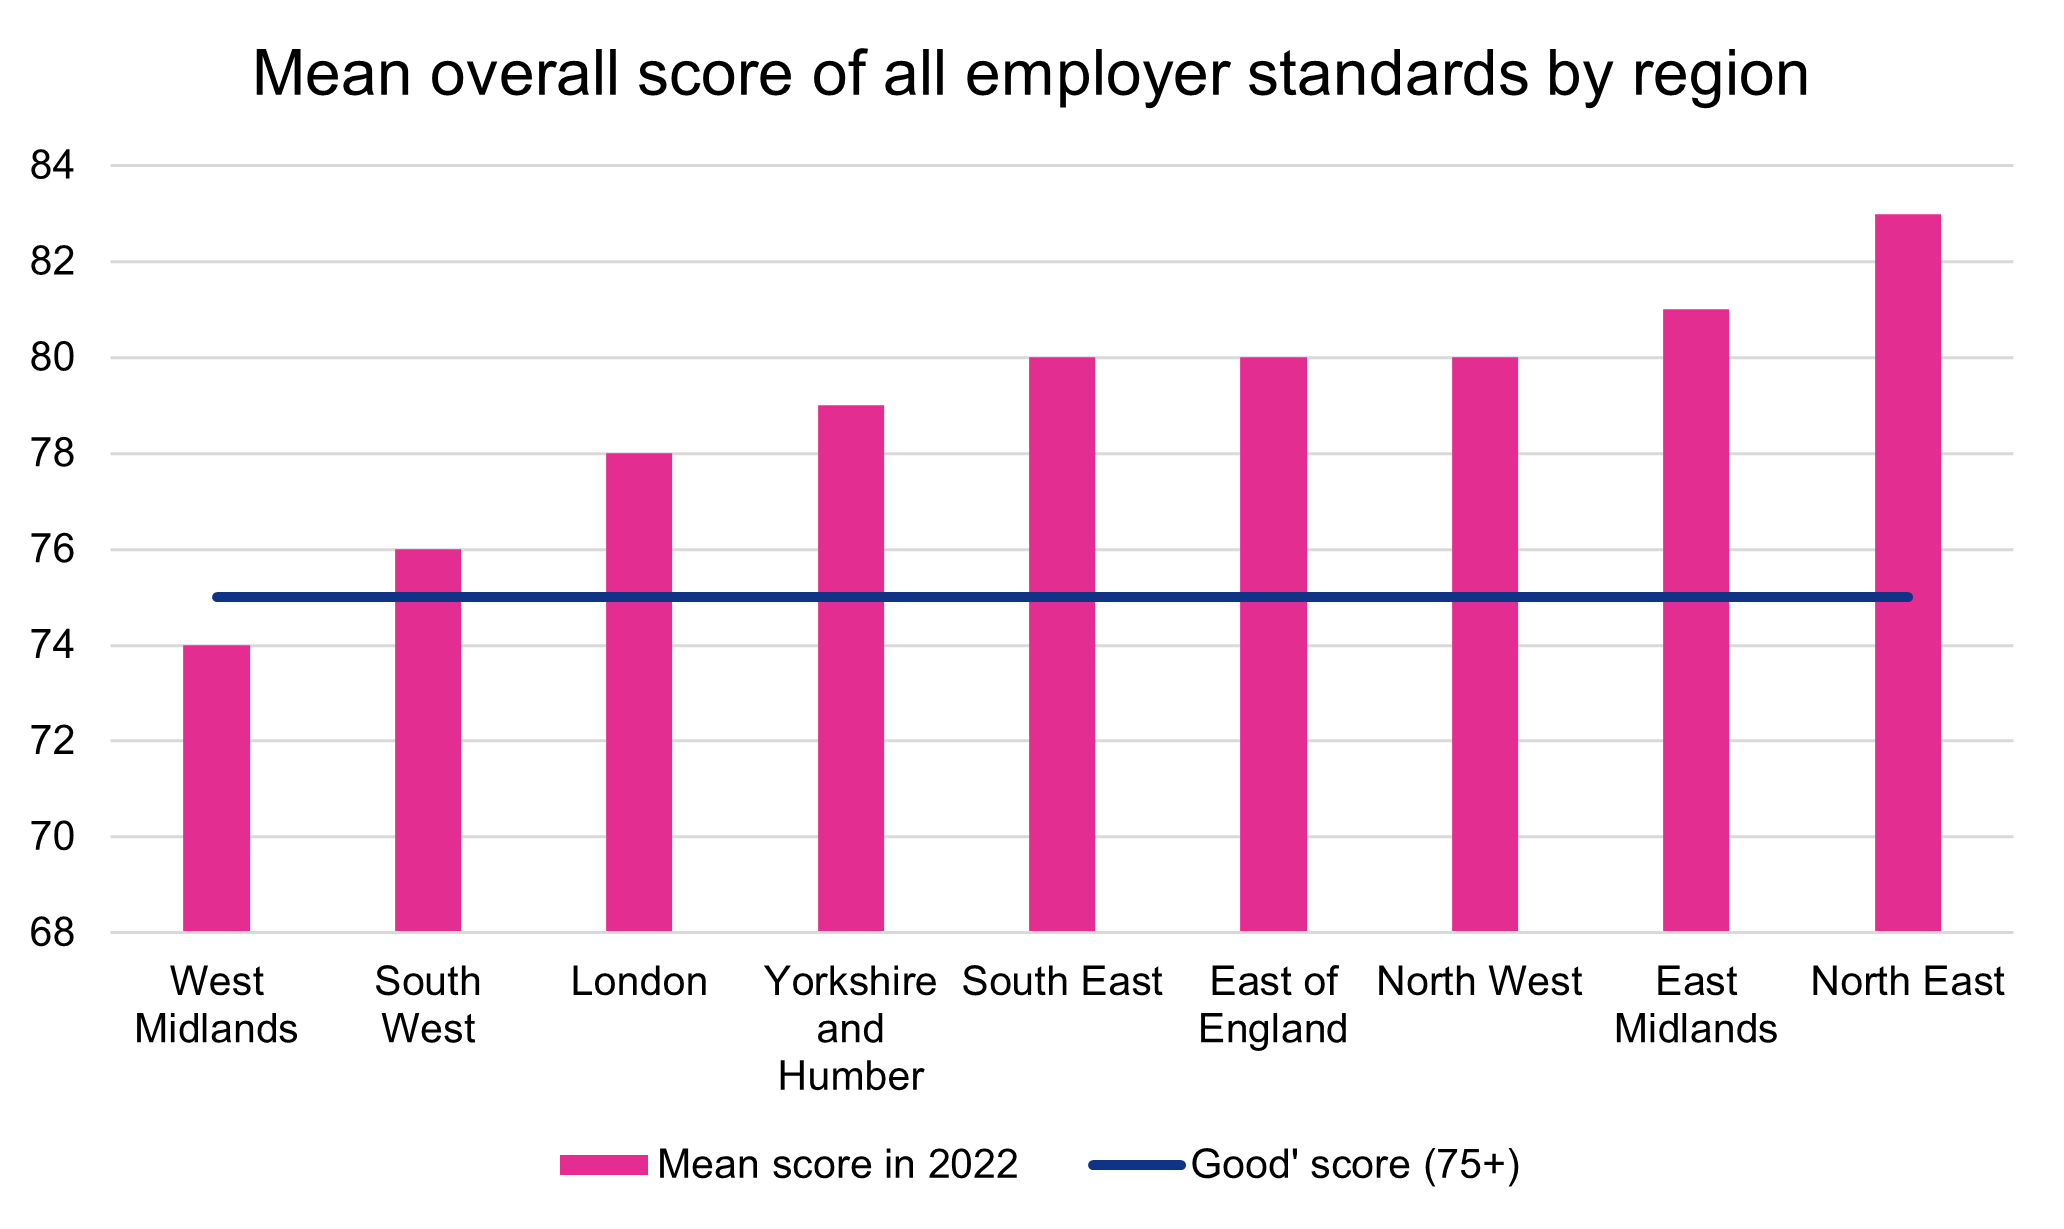 Chart showing mean overall score of all employer standards by region